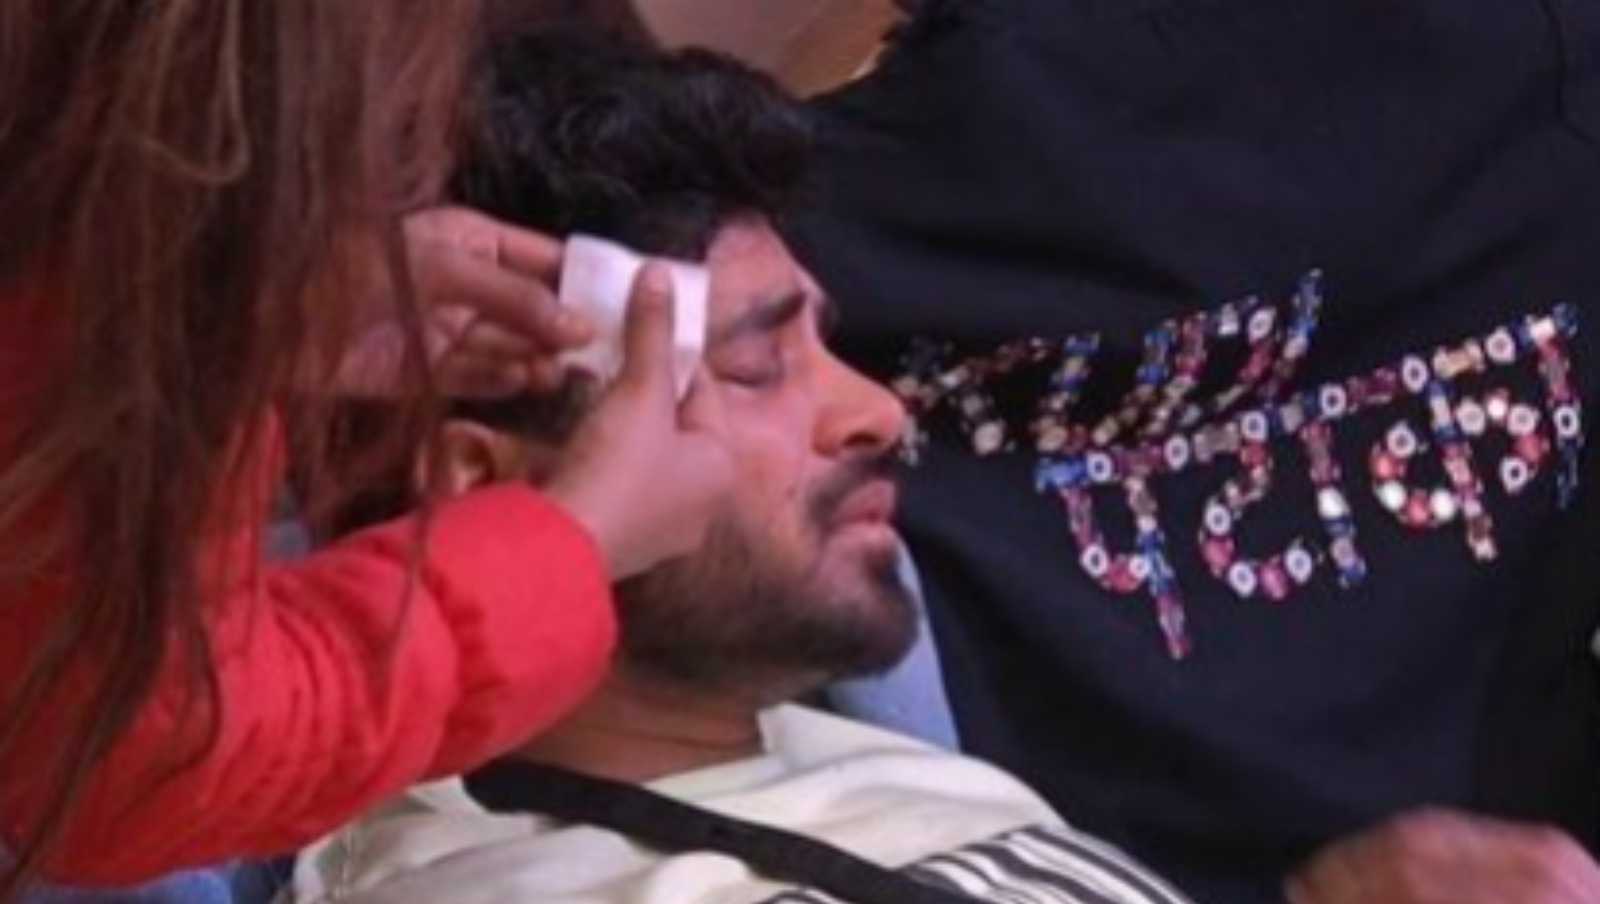 'Waiting for Archana to get her Karma' : Fans extend love to Bigg Boss 16's Shiv Thakare after his eye injury. lash out at Archana Gautam